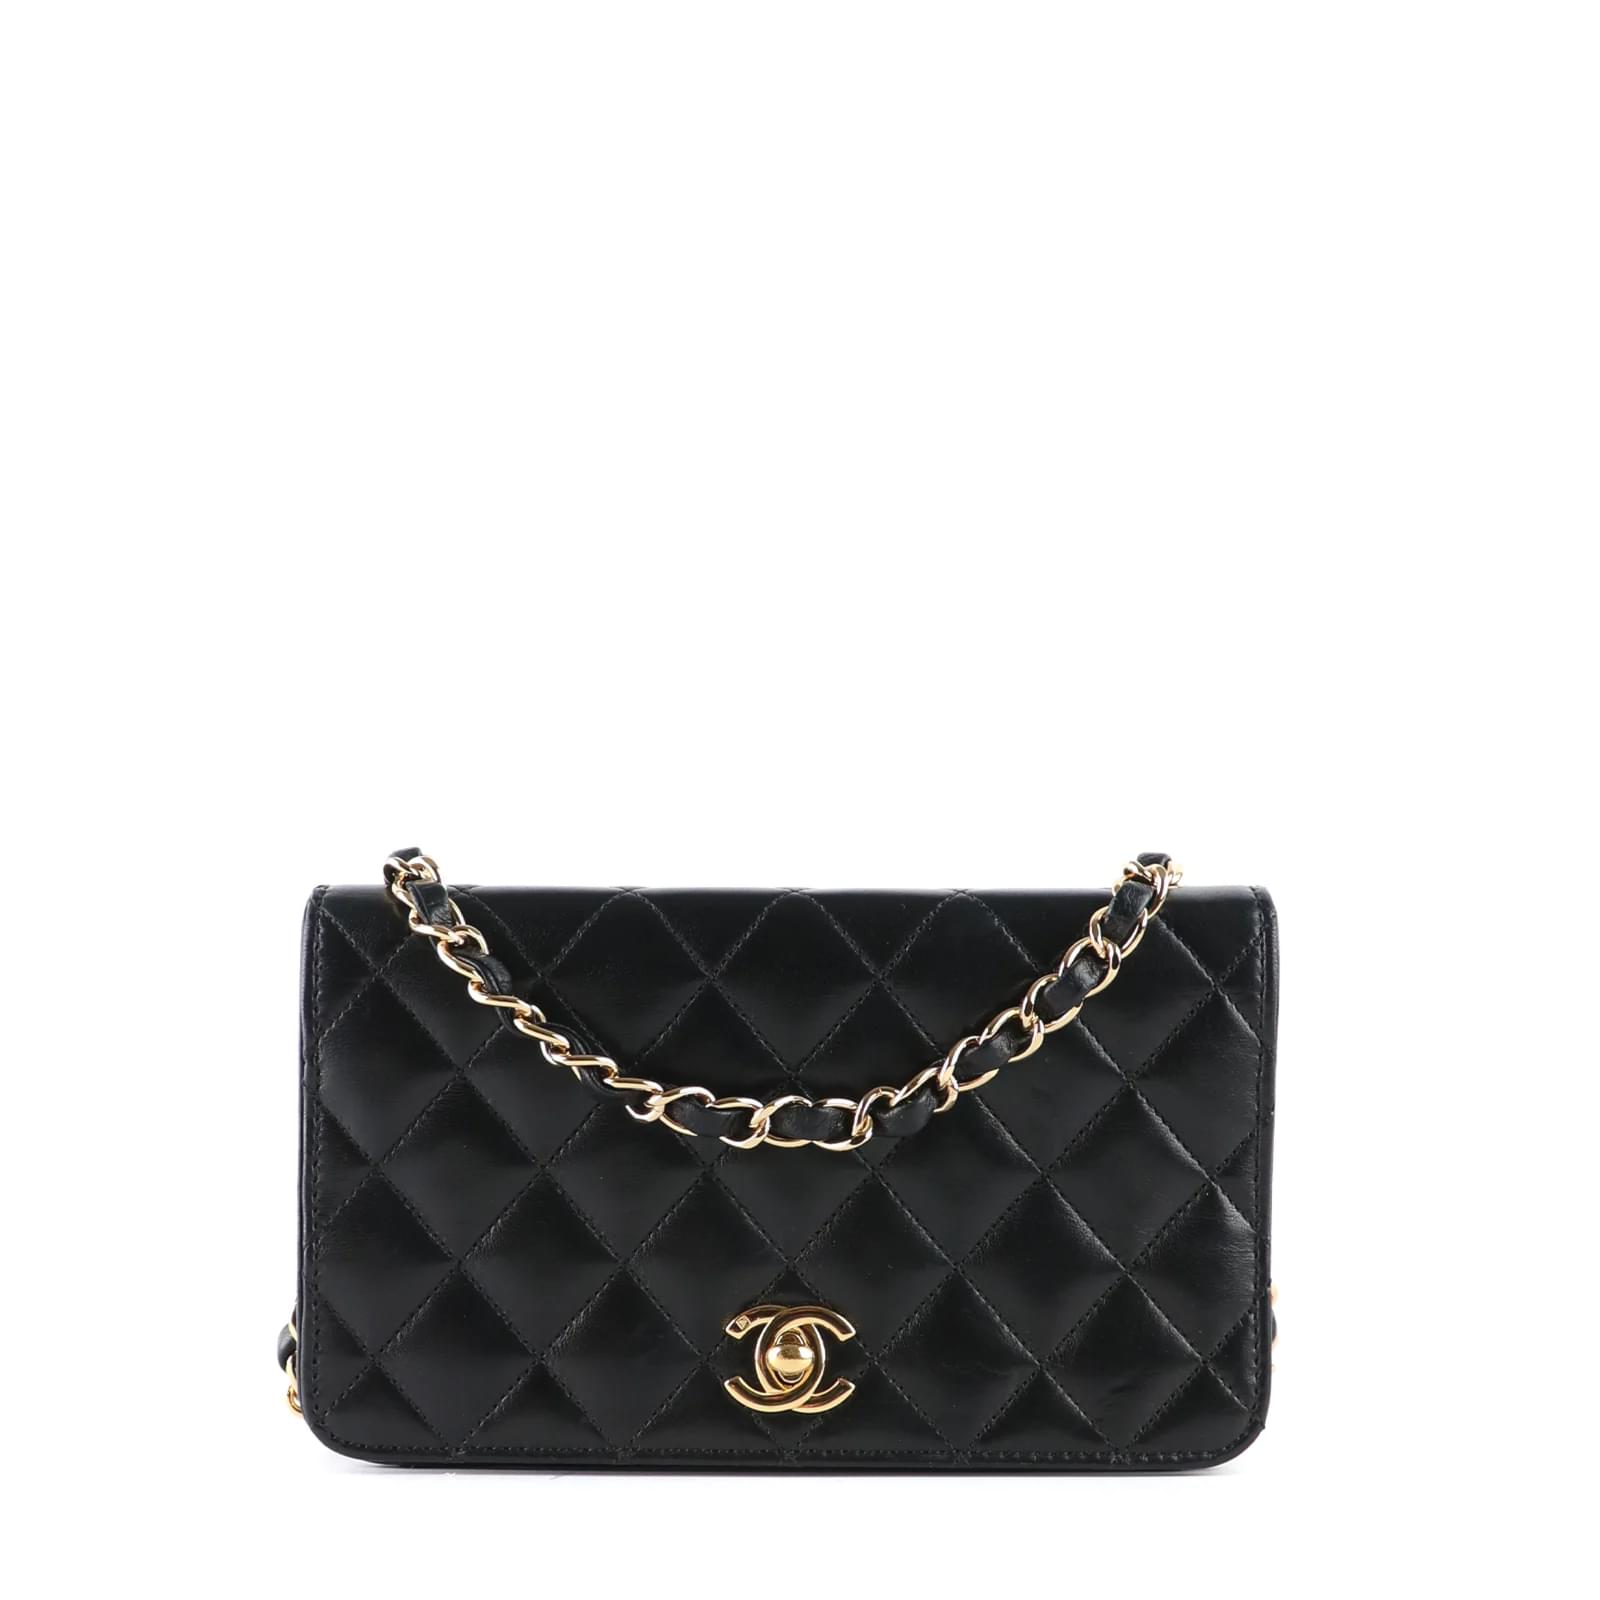 CHANEL Sheepskin Quilted Mademoiselle Vintage Shopping Tote Black 142869